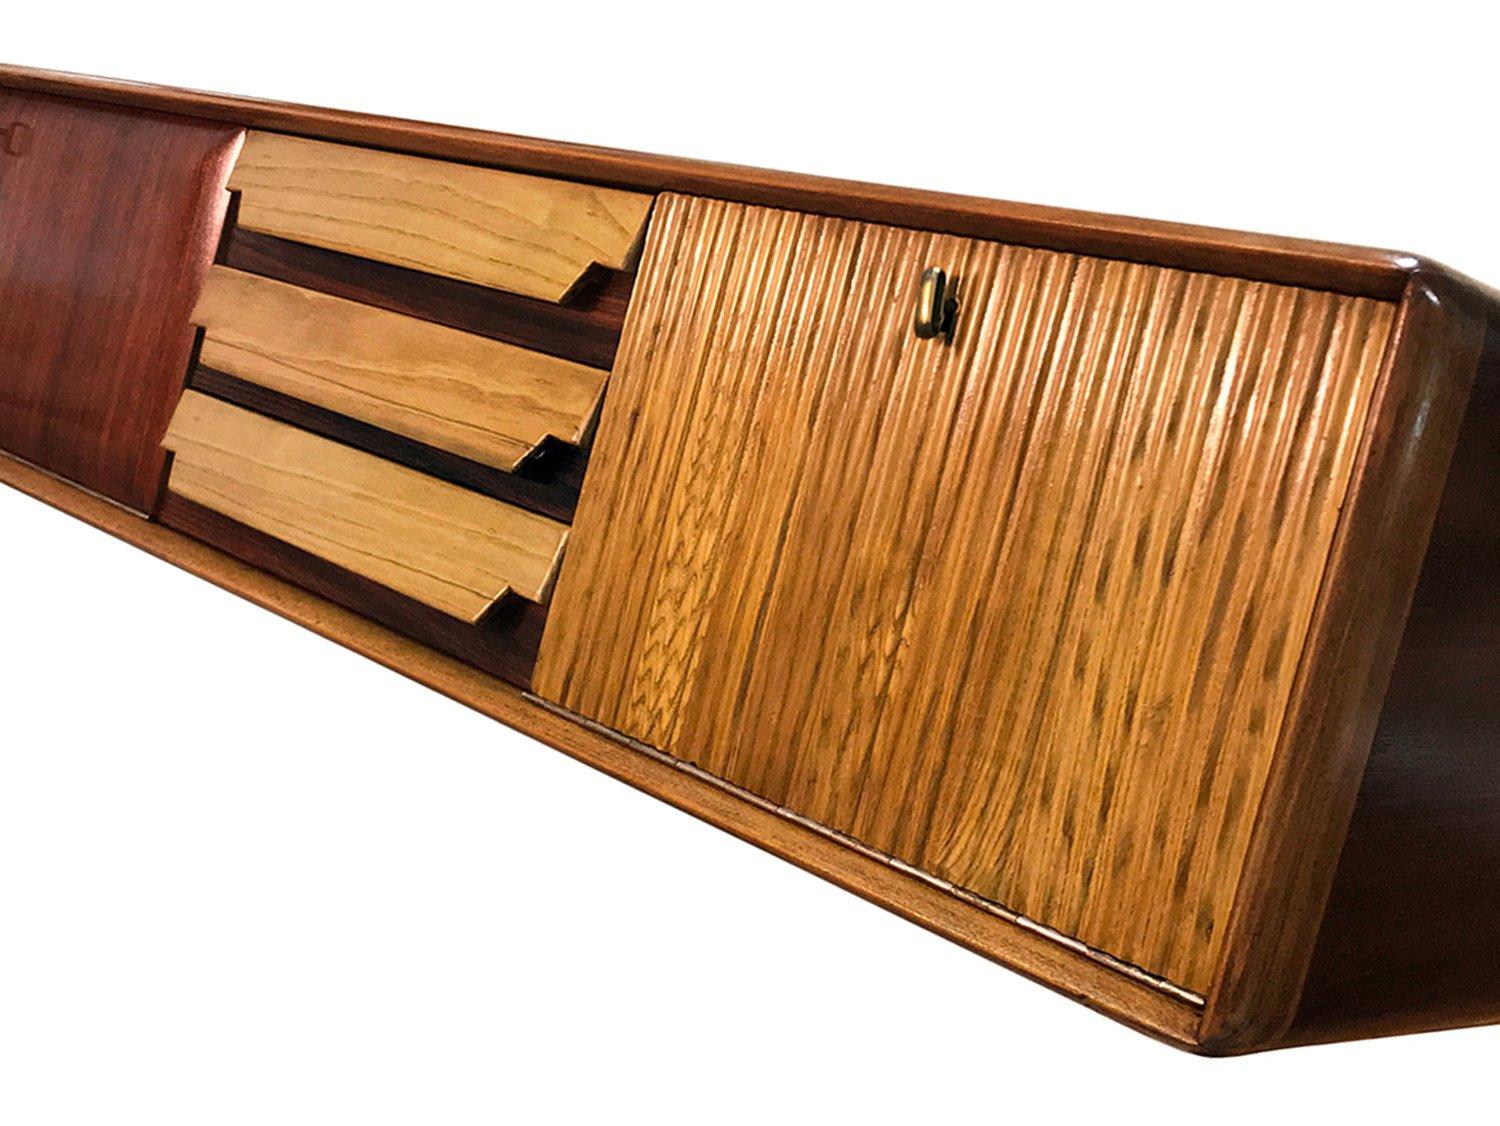 20th Century Italian Mid-Century Wall Mounted Sideboard with Drawers by Gio Ponti, 1950s